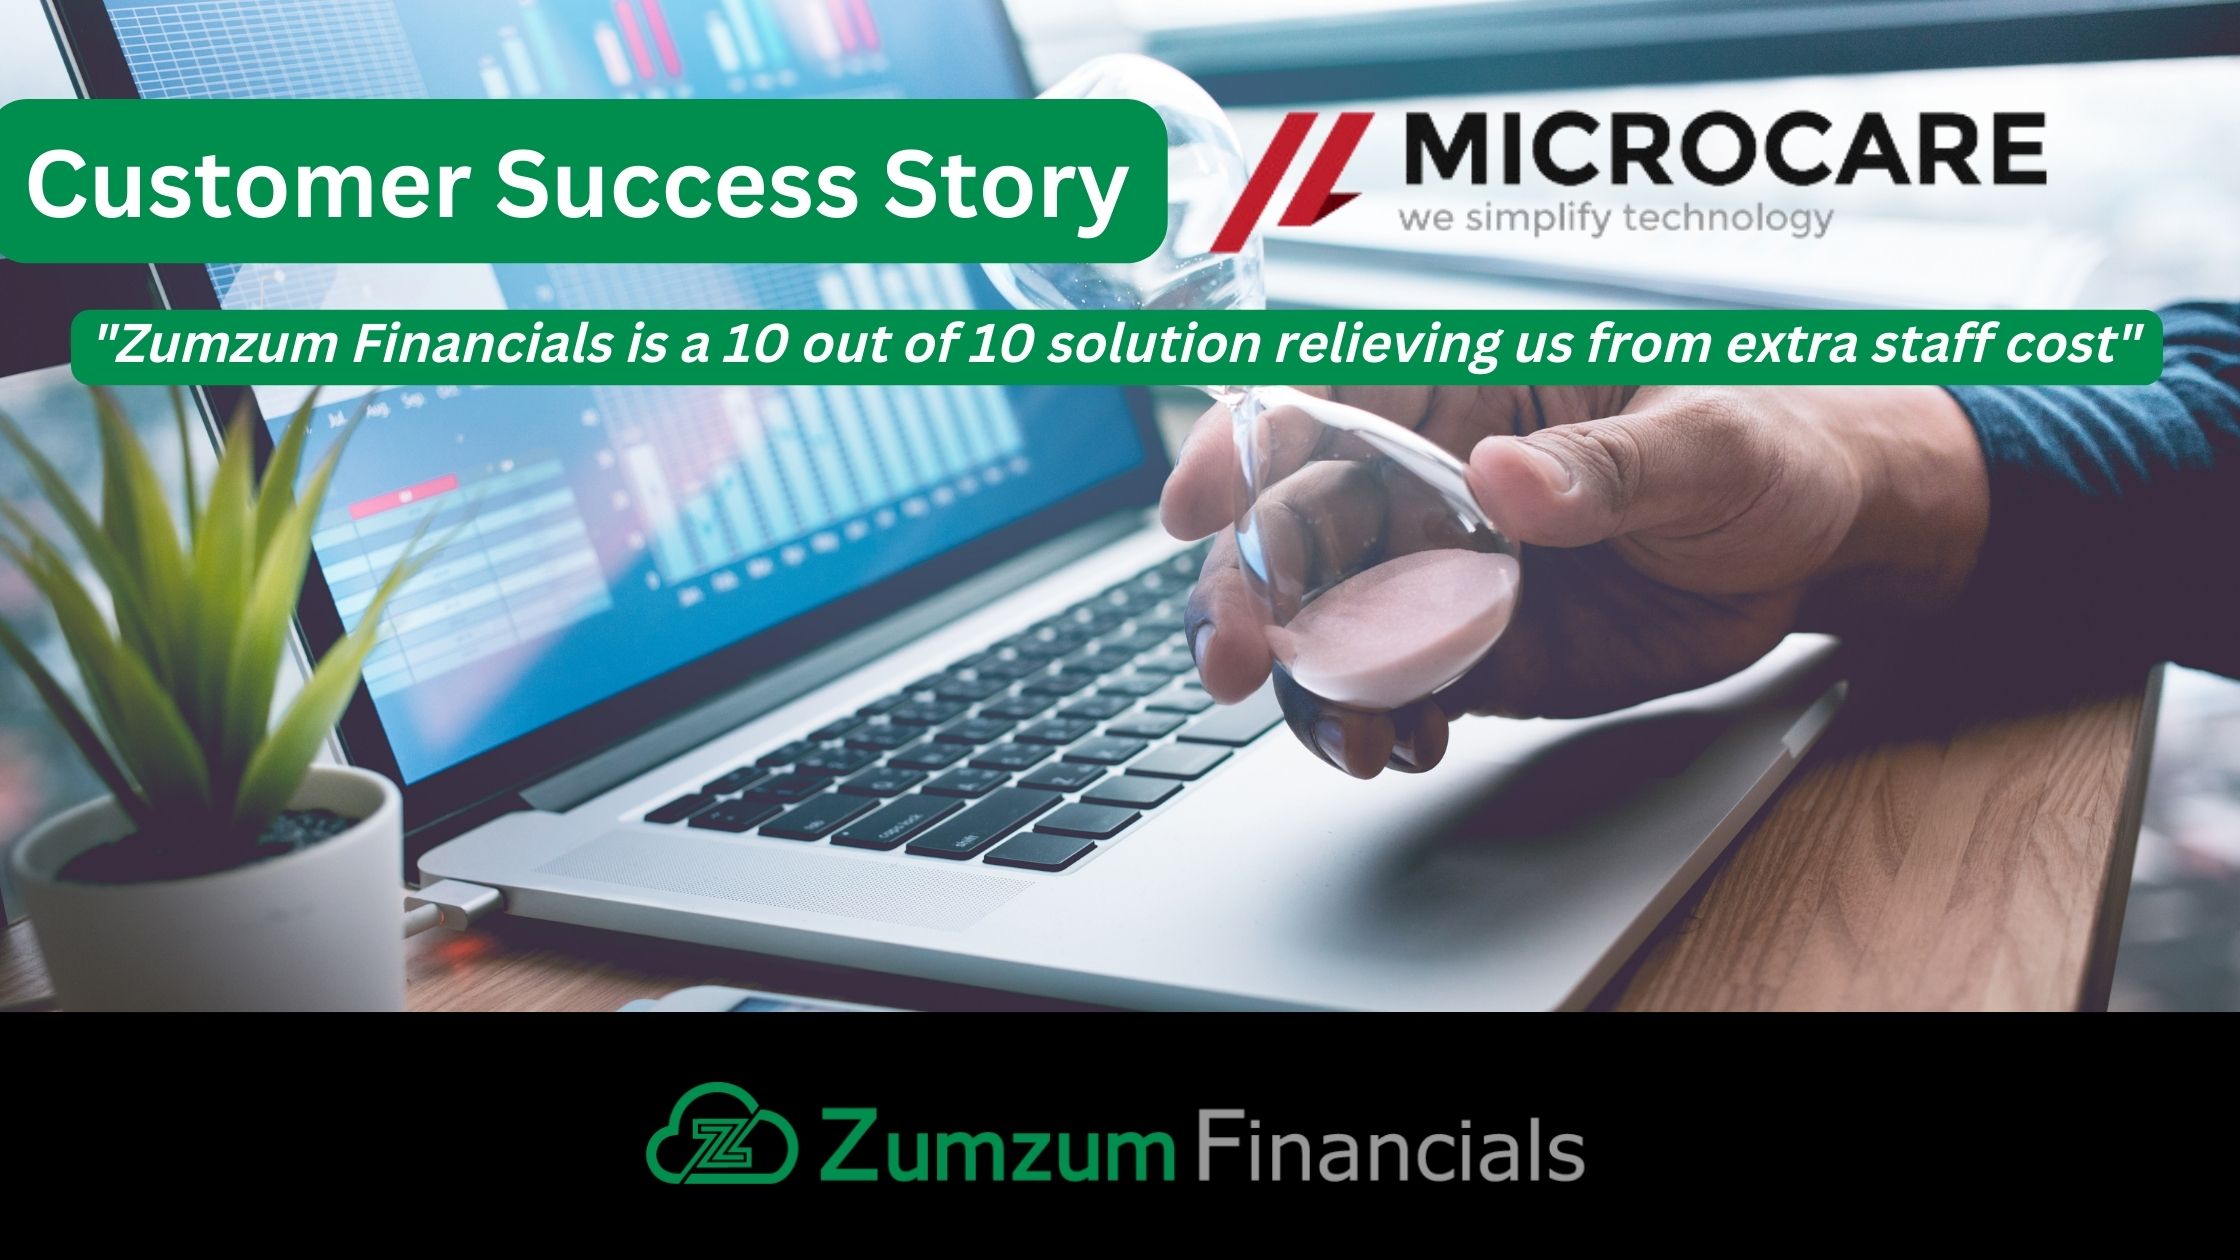 Customer Success Story Microcare Systems